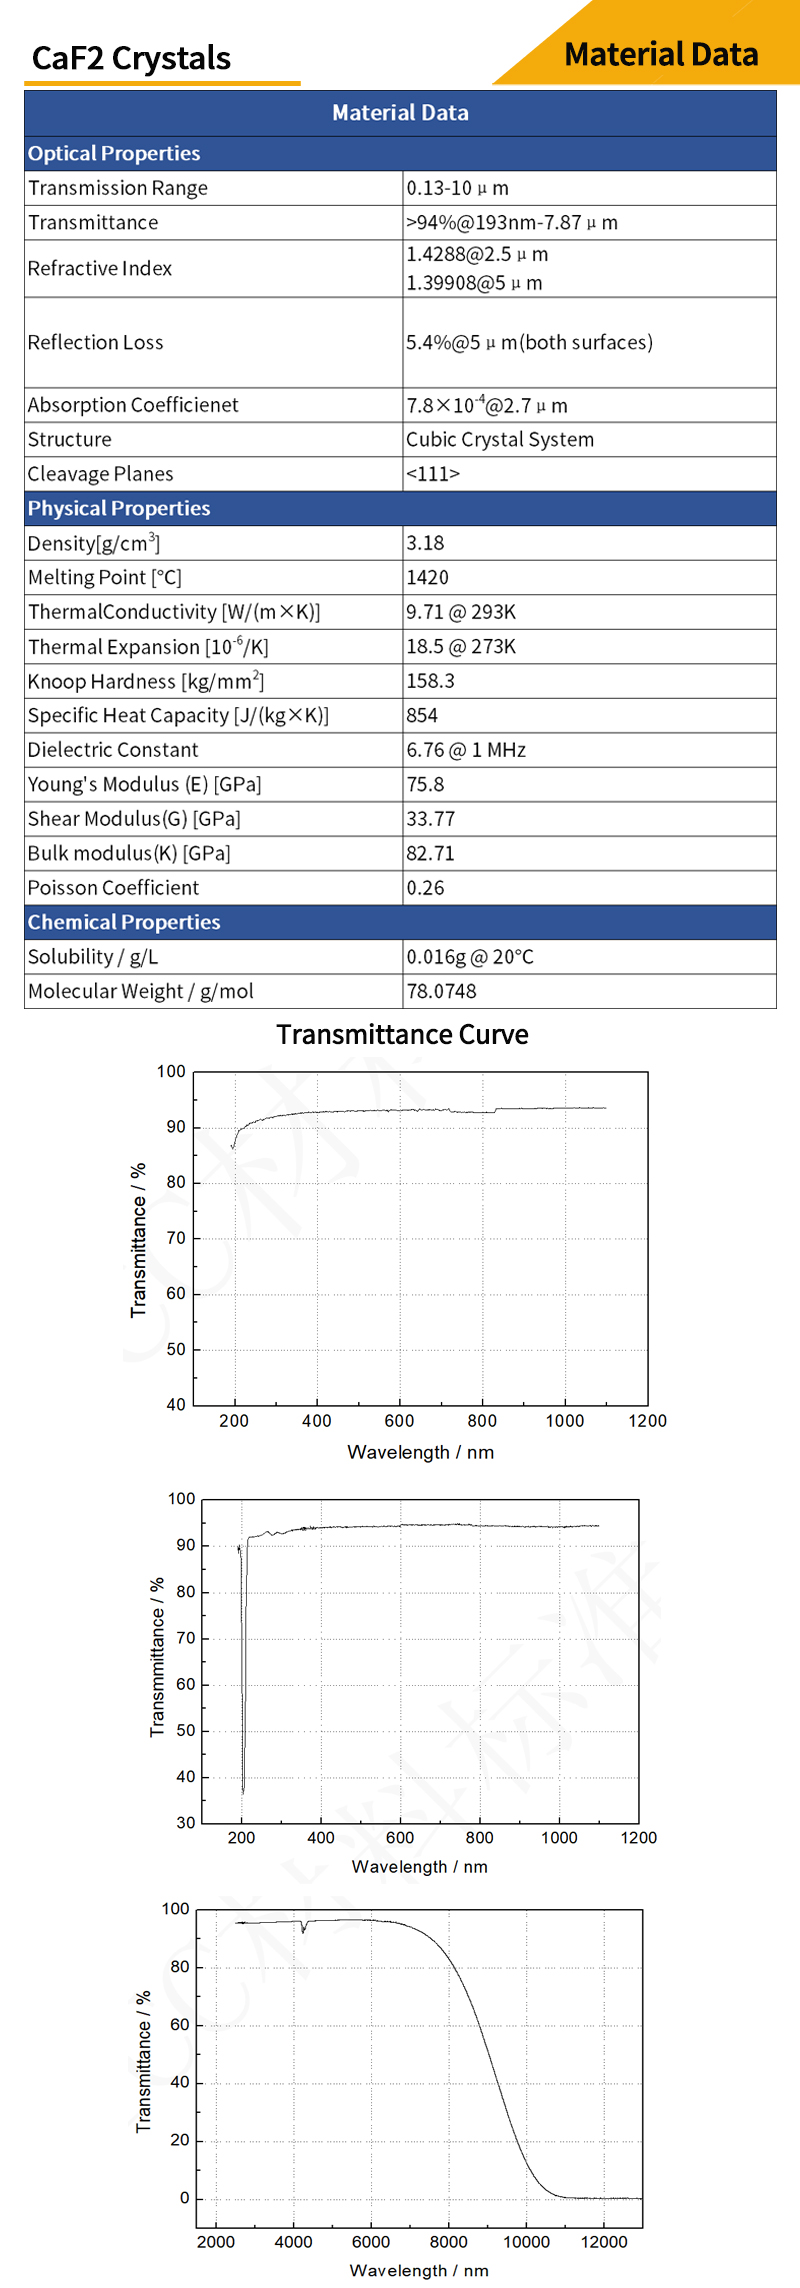 Low Stress calcium fluoride material data and transmittance curves